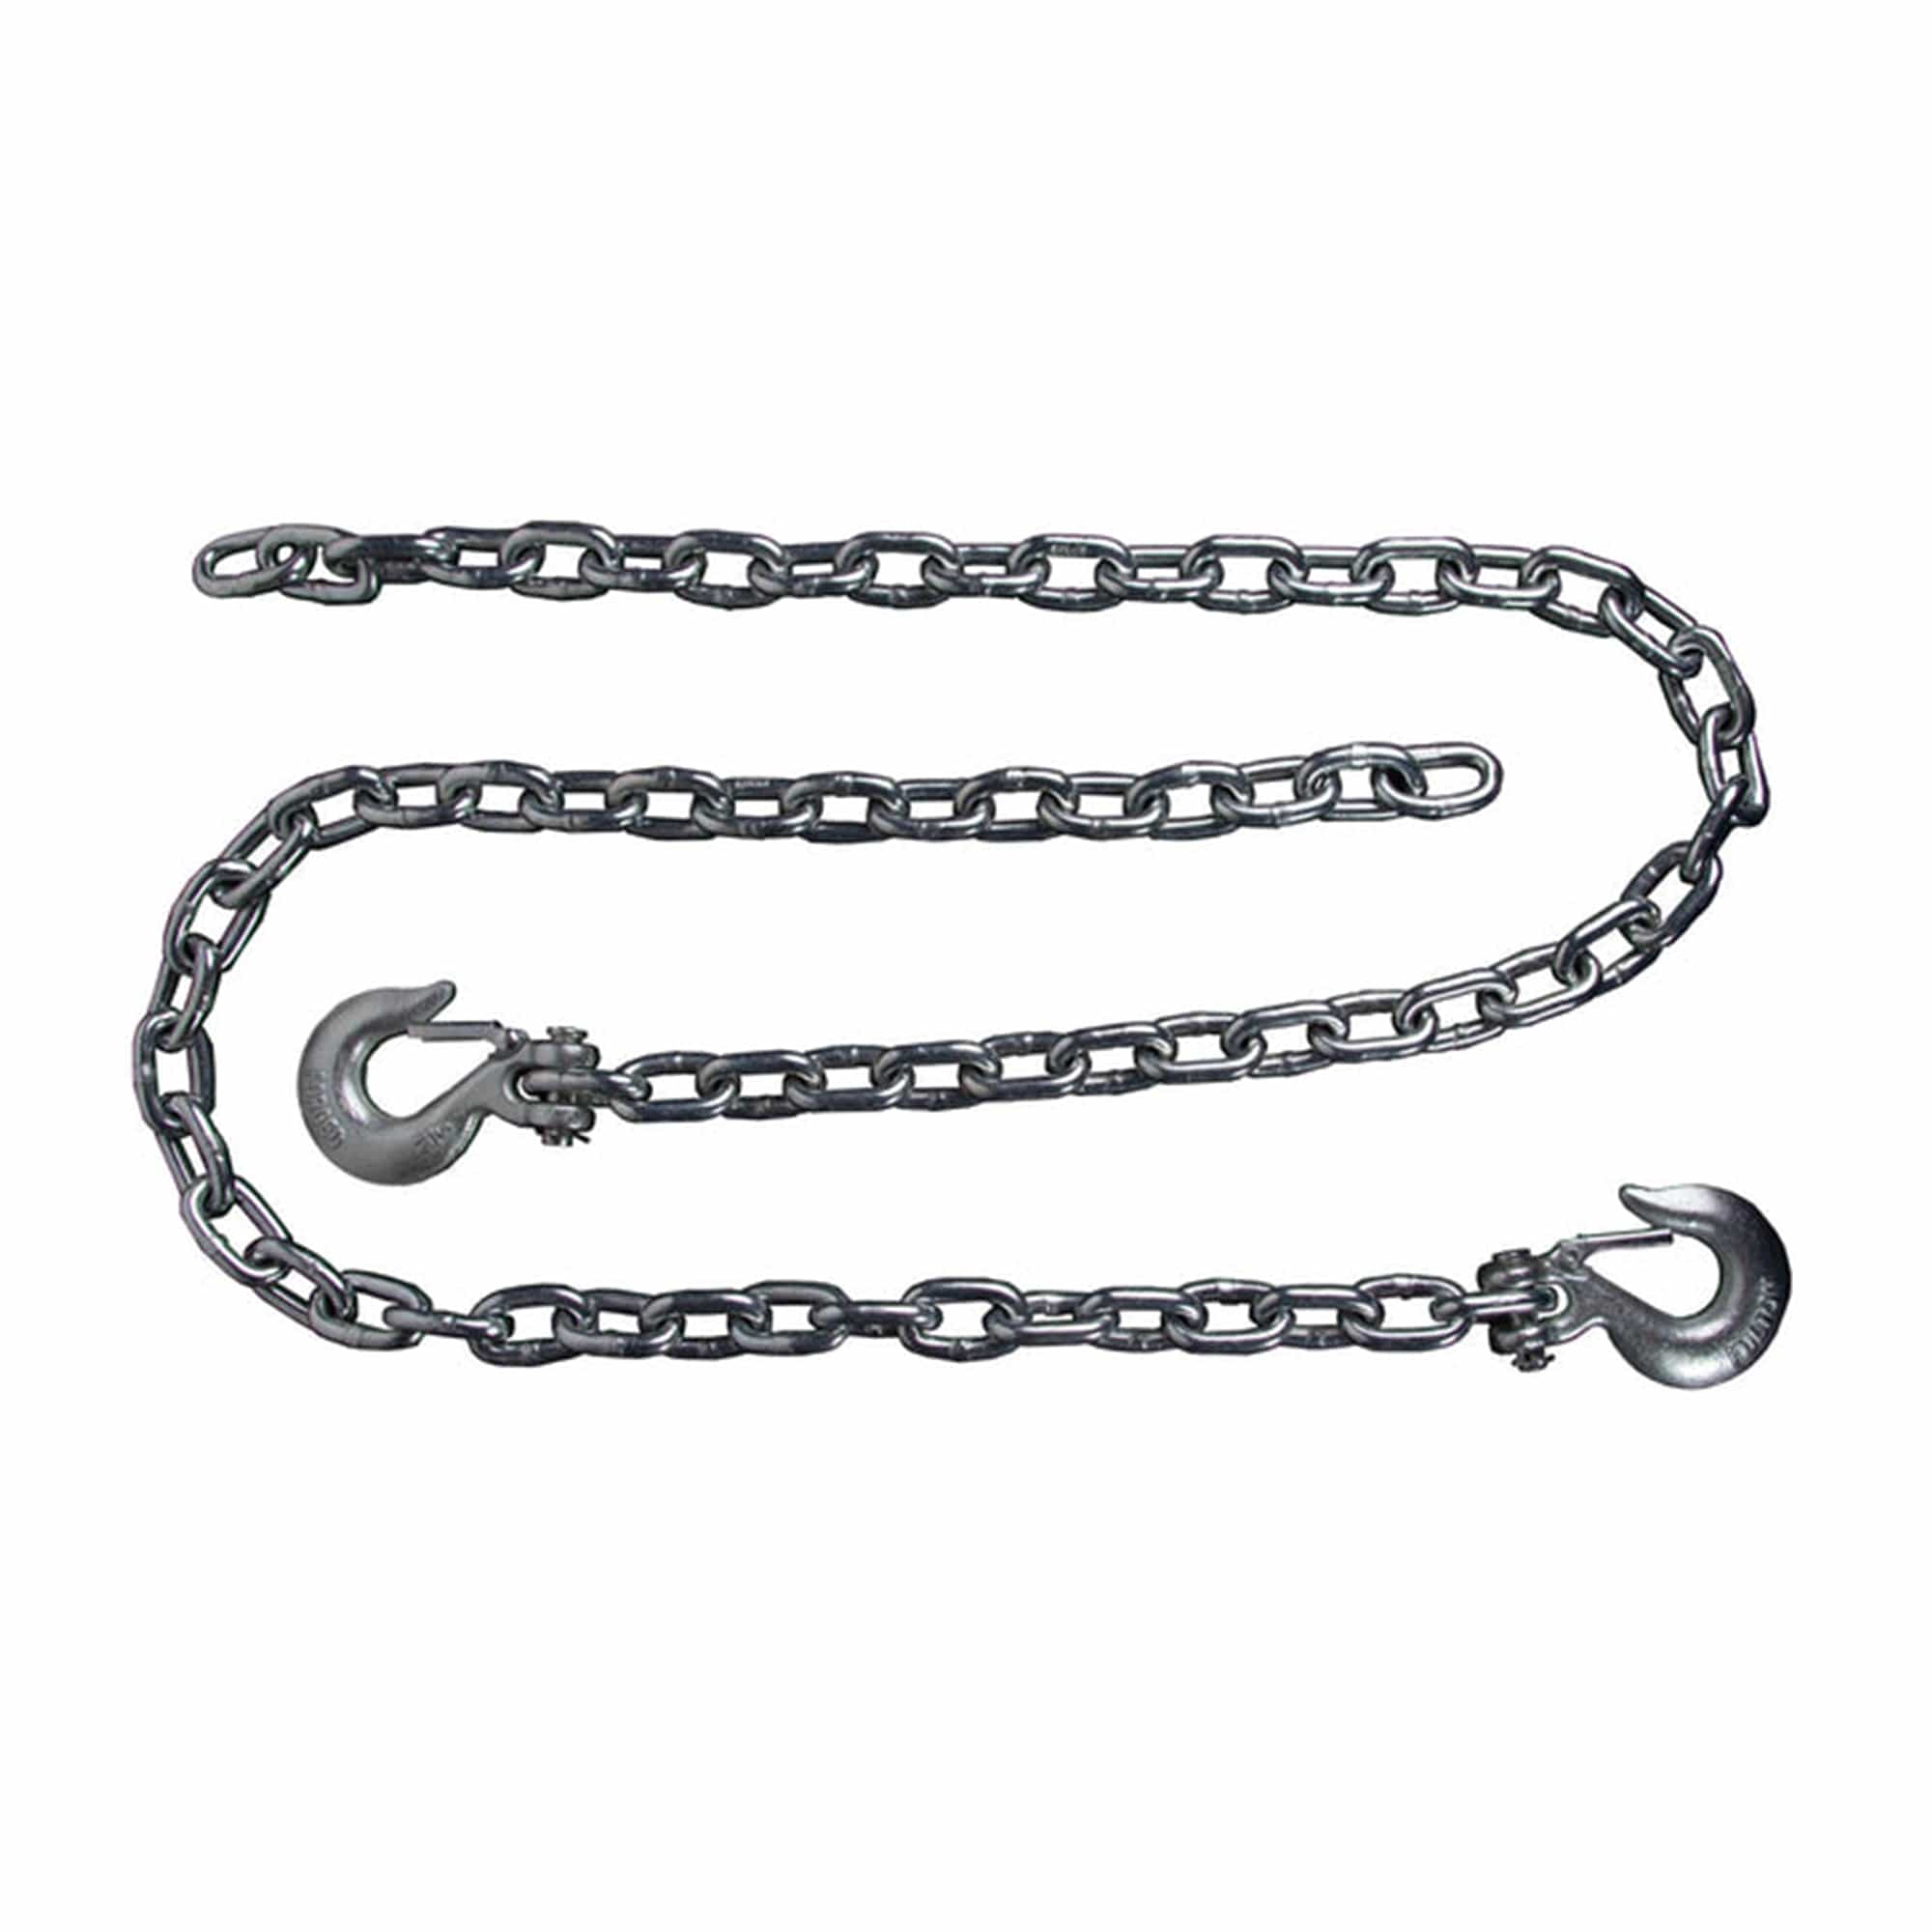 Bulletproof Hitches HDCHAINS 44" Heavy Duty Safety Chains (Pair)